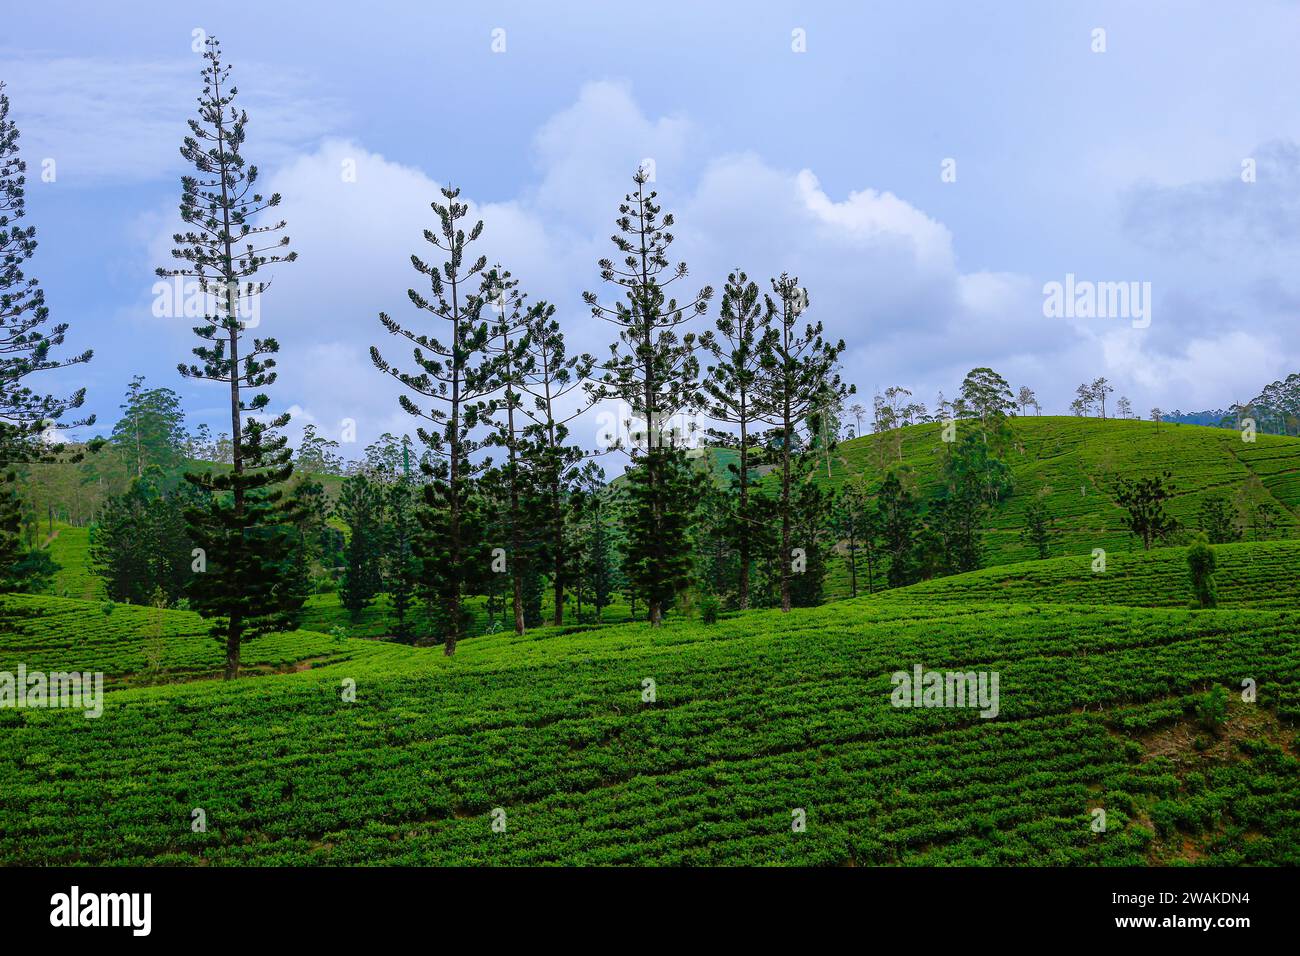 Pine trees are found growing between tea plantations in the highlands of Sri Lanka Stock Photo